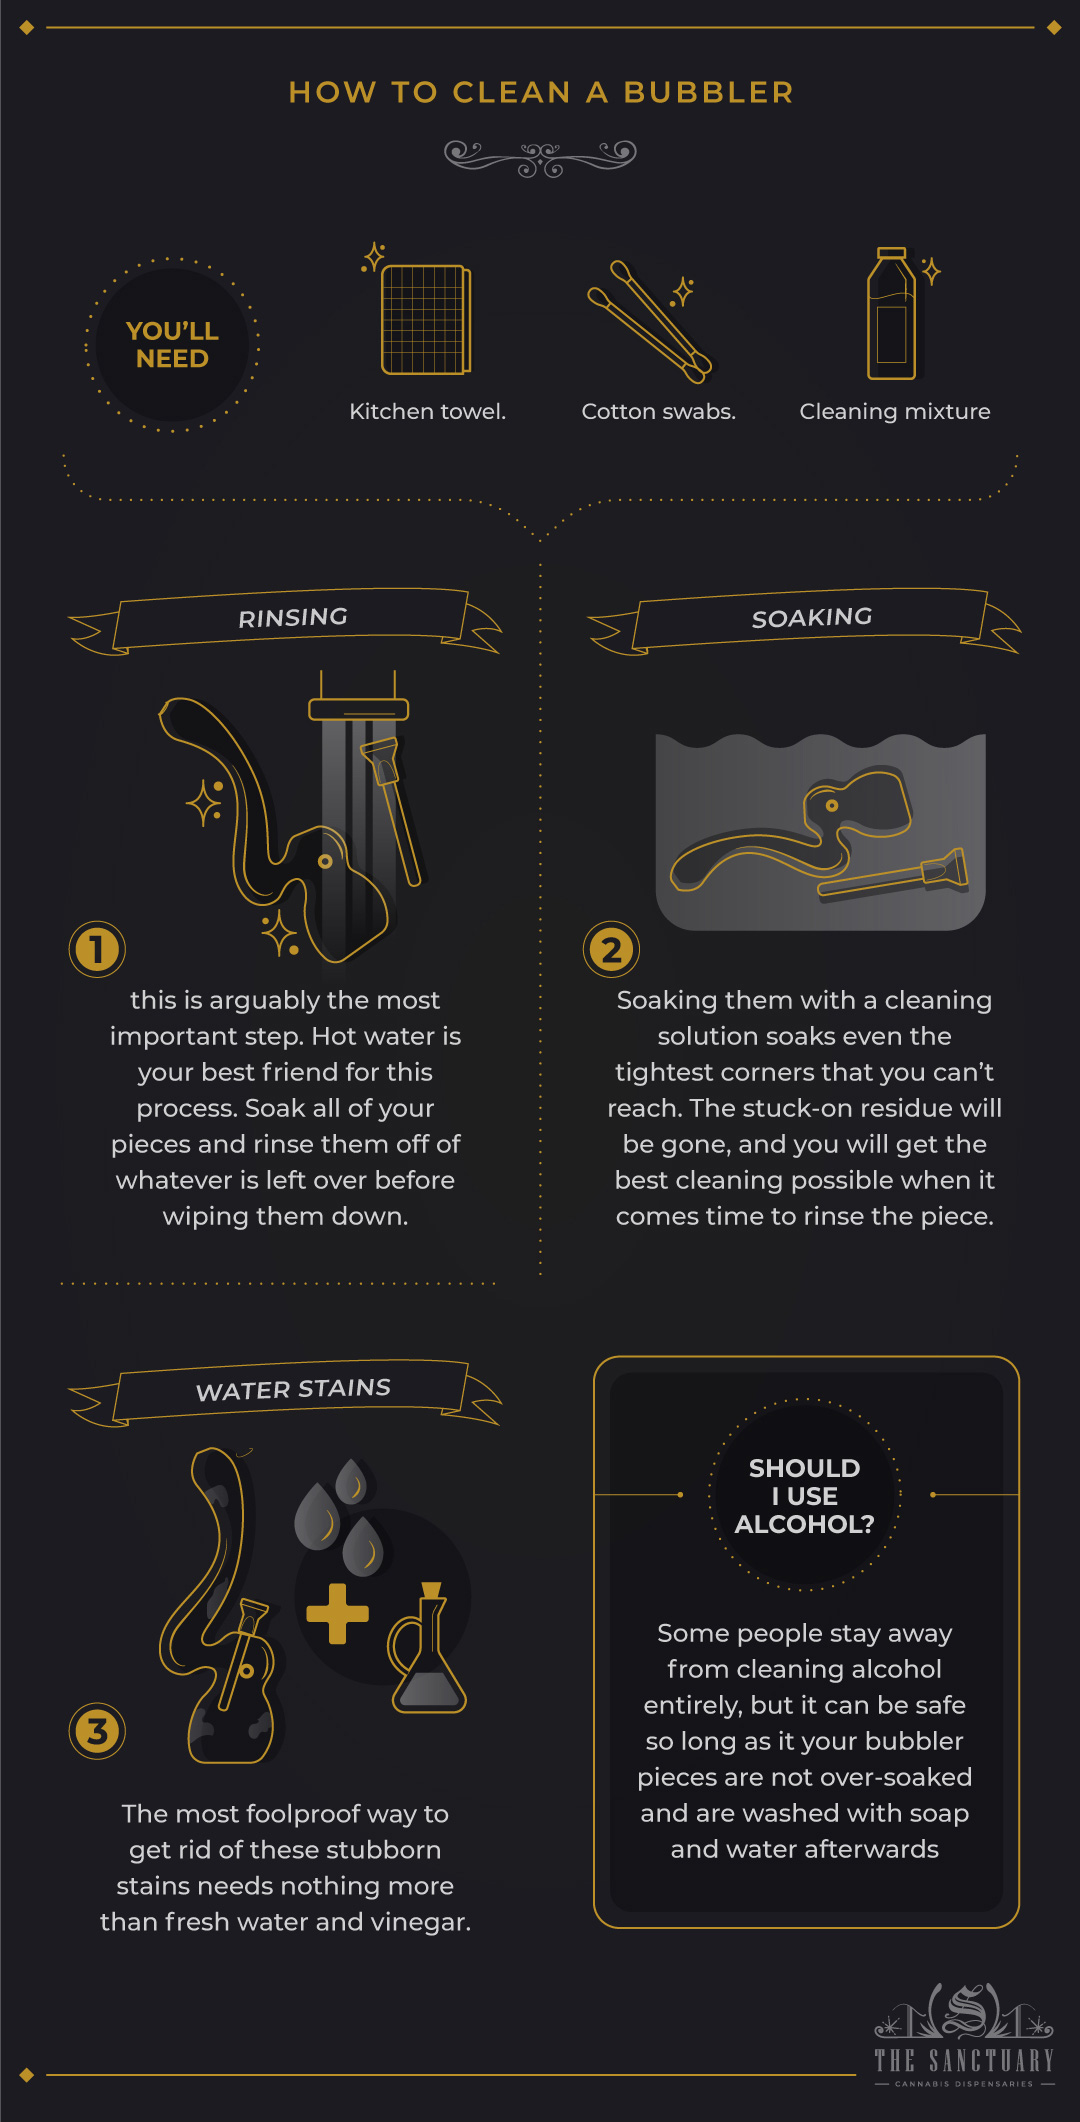 How to Clean a Bubbler